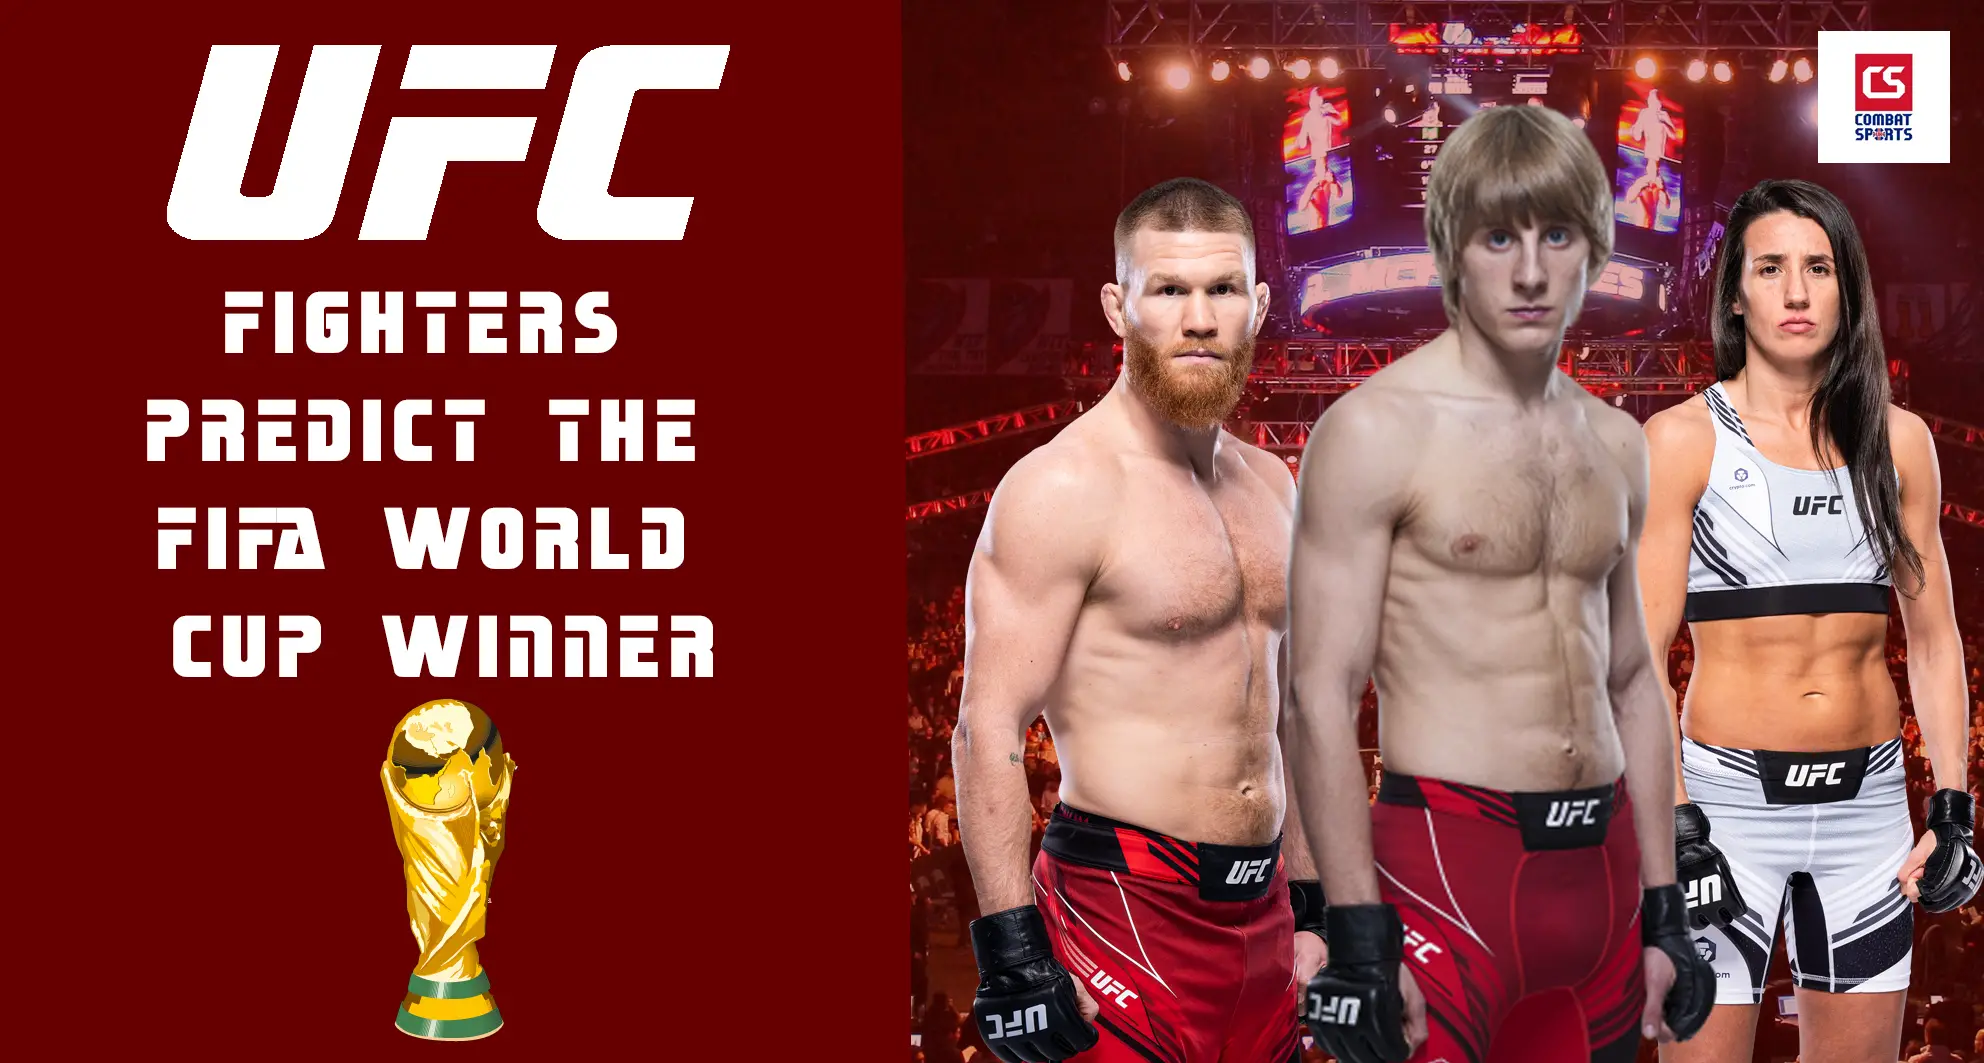 UFC Fighters Predict FIFA World Cup Winner